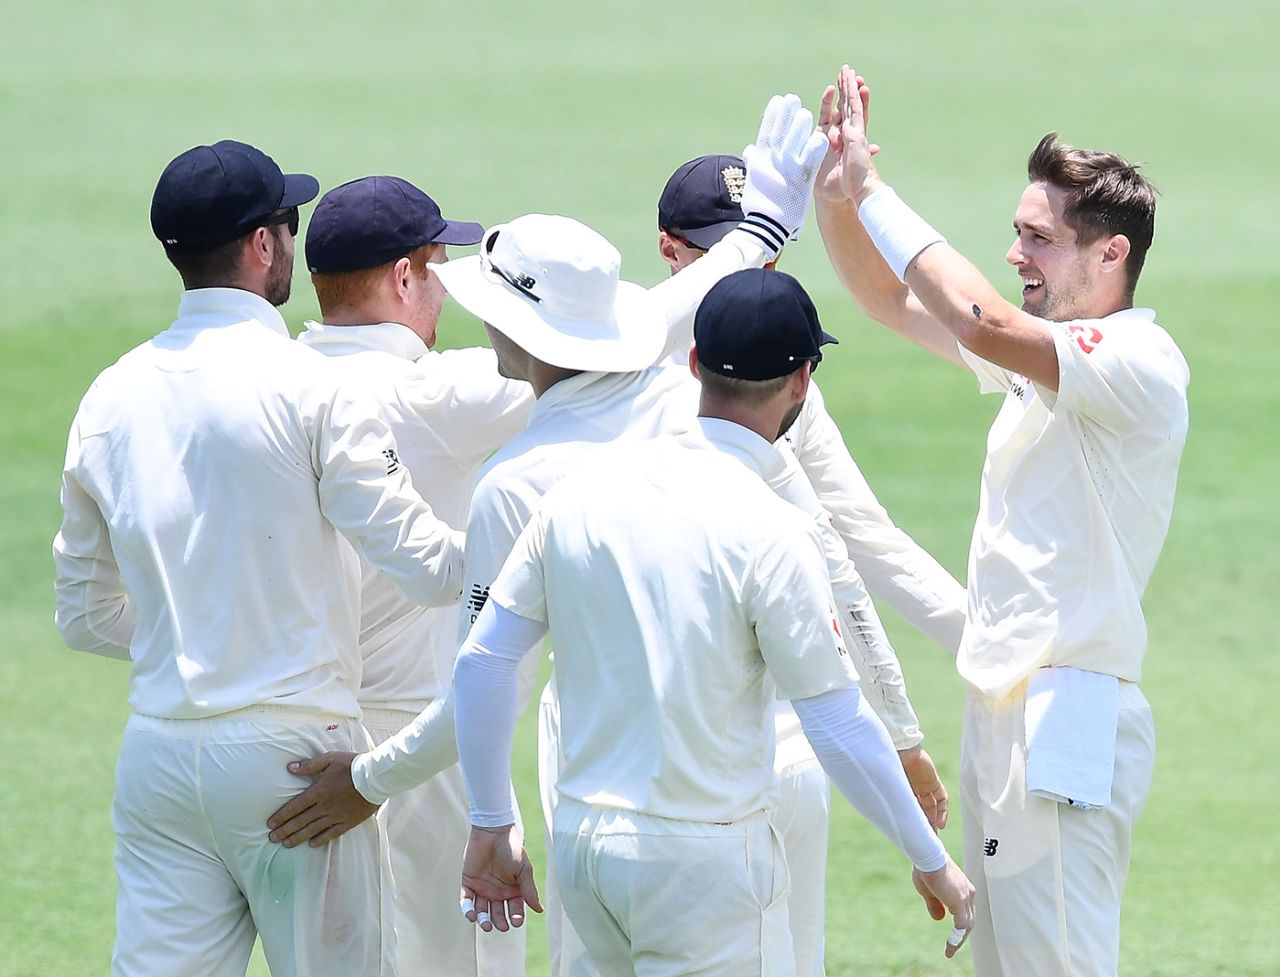 Chris Woakes broke through CA XI's top order with quick wickets, Cricket Australia XI v England, The Ashes 2017-18, tour match, 1st day, Townsville, November 15, 2017